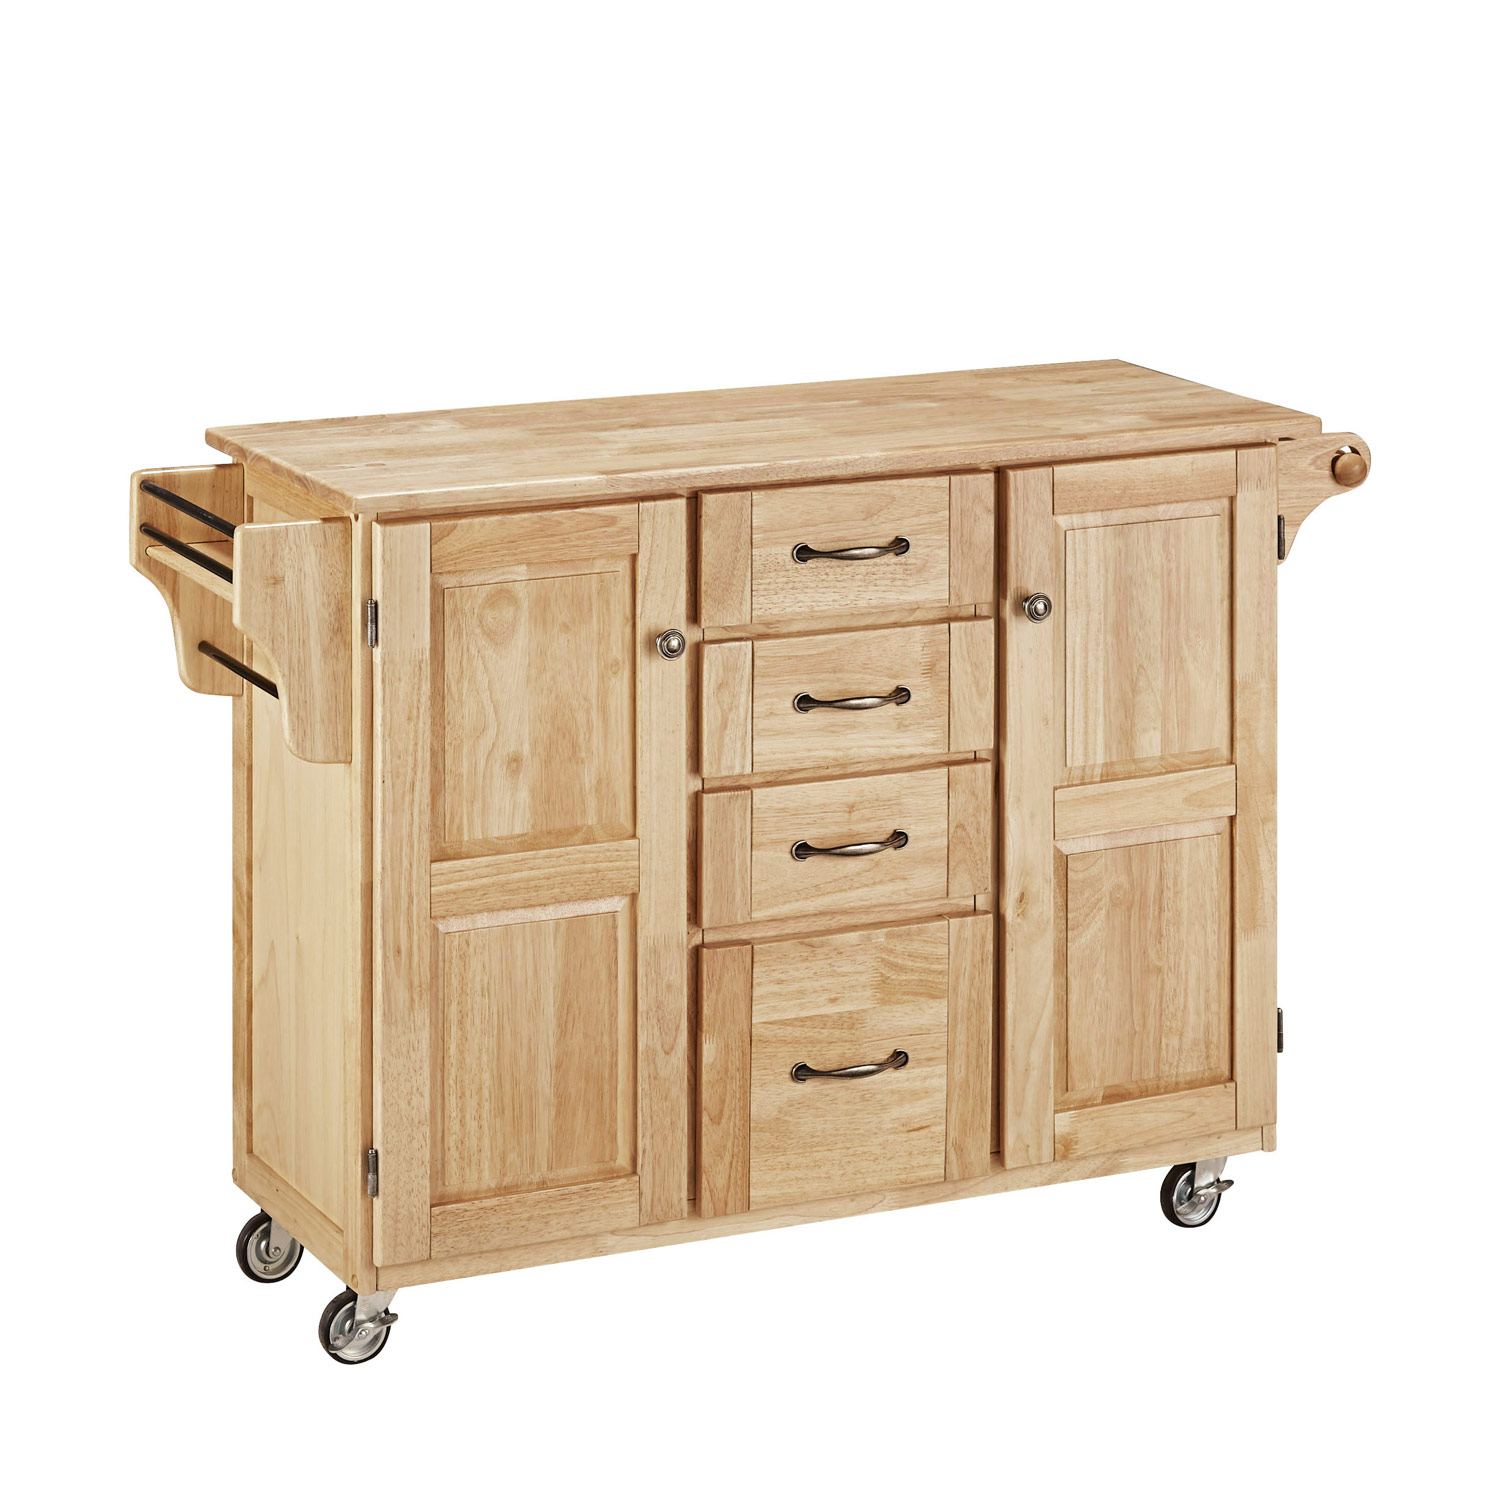 Home Styles Create-A-Cart with Natural Wood Top - Natural